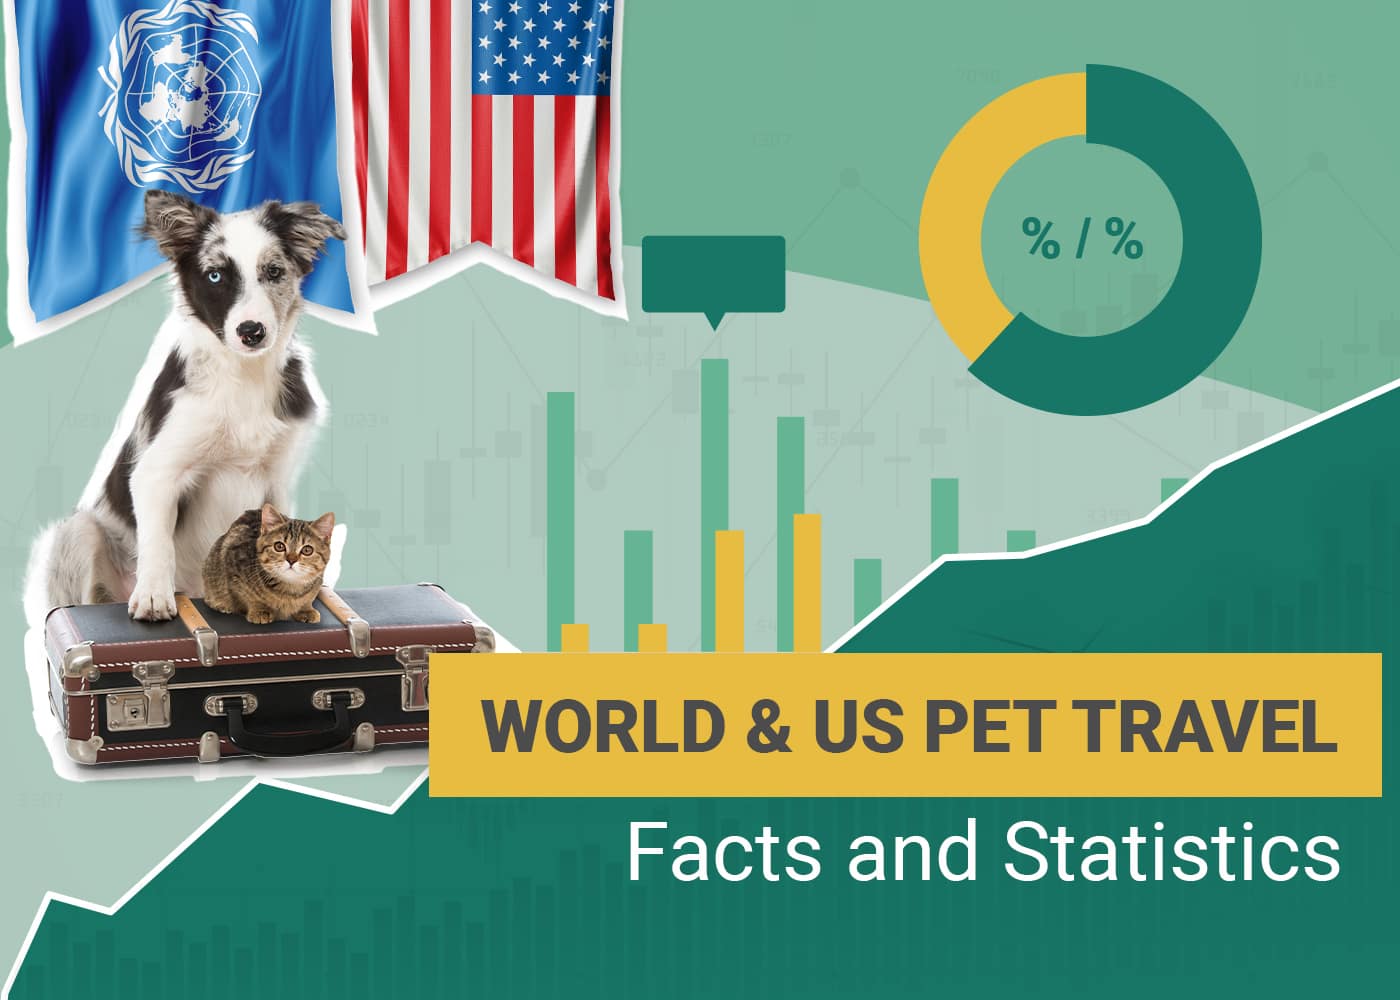 World & US Pet Travel Facts and Statistics